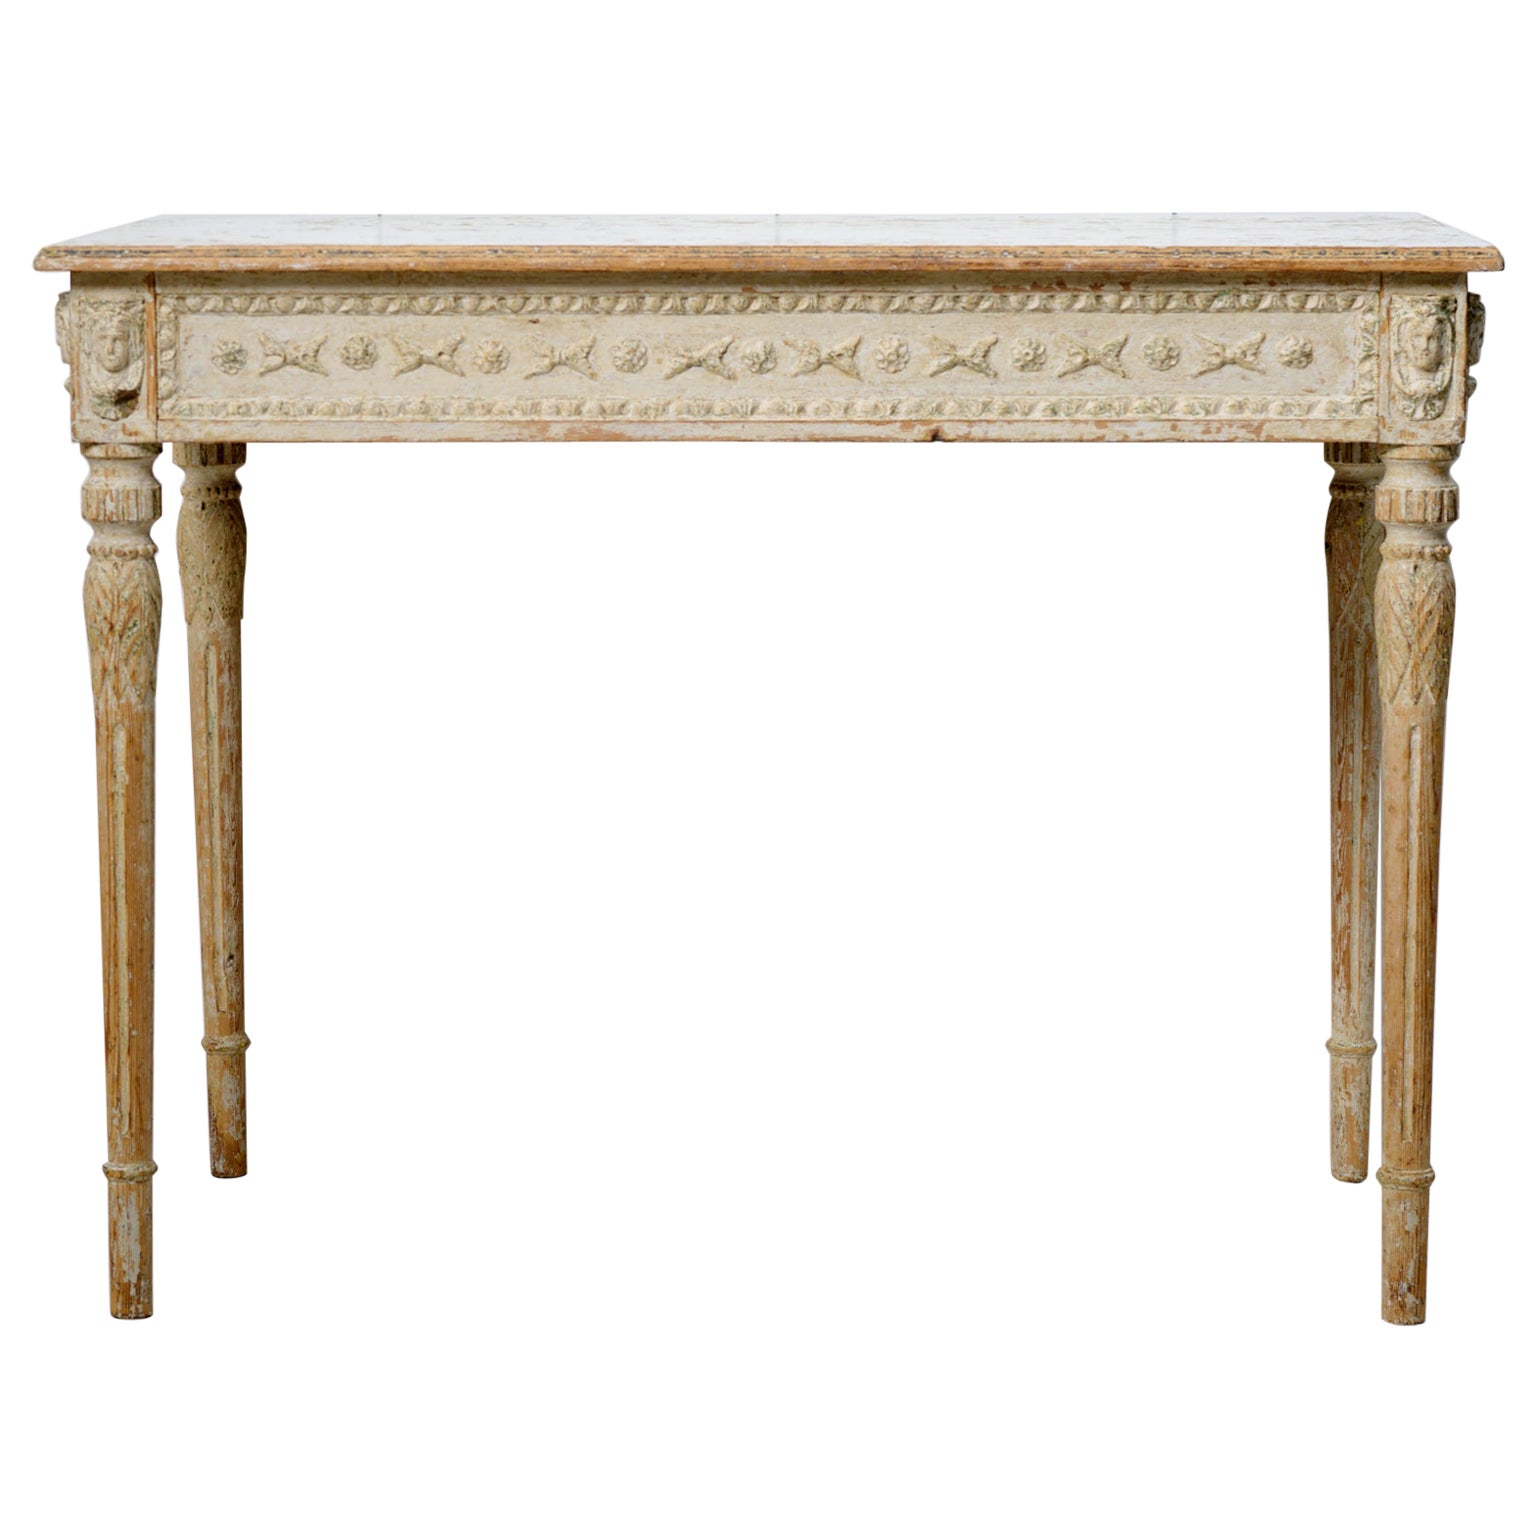 Antique Genuine Swedish Gustavian Detailed Decorated Console Table